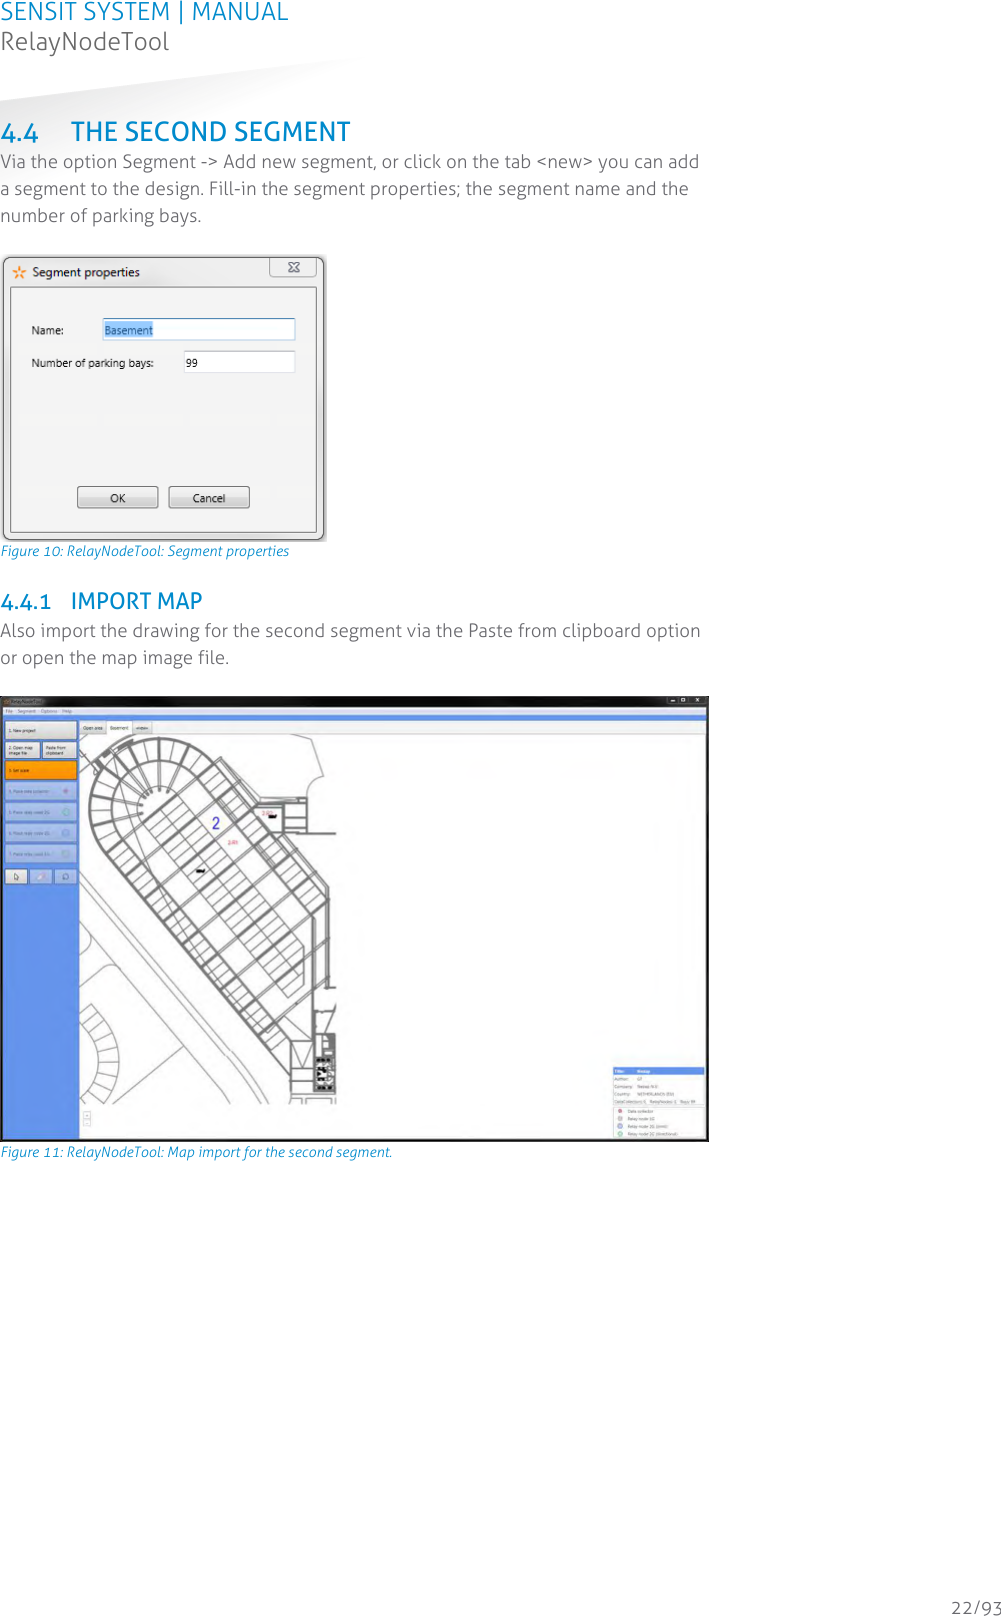 SENSIT SYSTEM | MANUAL RelayNodeTool  22/93 4.4 THE SECOND SEGMENT Via the option Segment -&gt; Add new segment, or click on the tab &lt;new&gt; you can add a segment to the design. Fill-in the segment properties; the segment name and the number of parking bays.   Figure 10: RelayNodeTool: Segment properties 4.4.1 IMPORT MAP Also import the drawing for the second segment via the Paste from clipboard option or open the map image file.   Figure 11: RelayNodeTool: Map import for the second segment.    